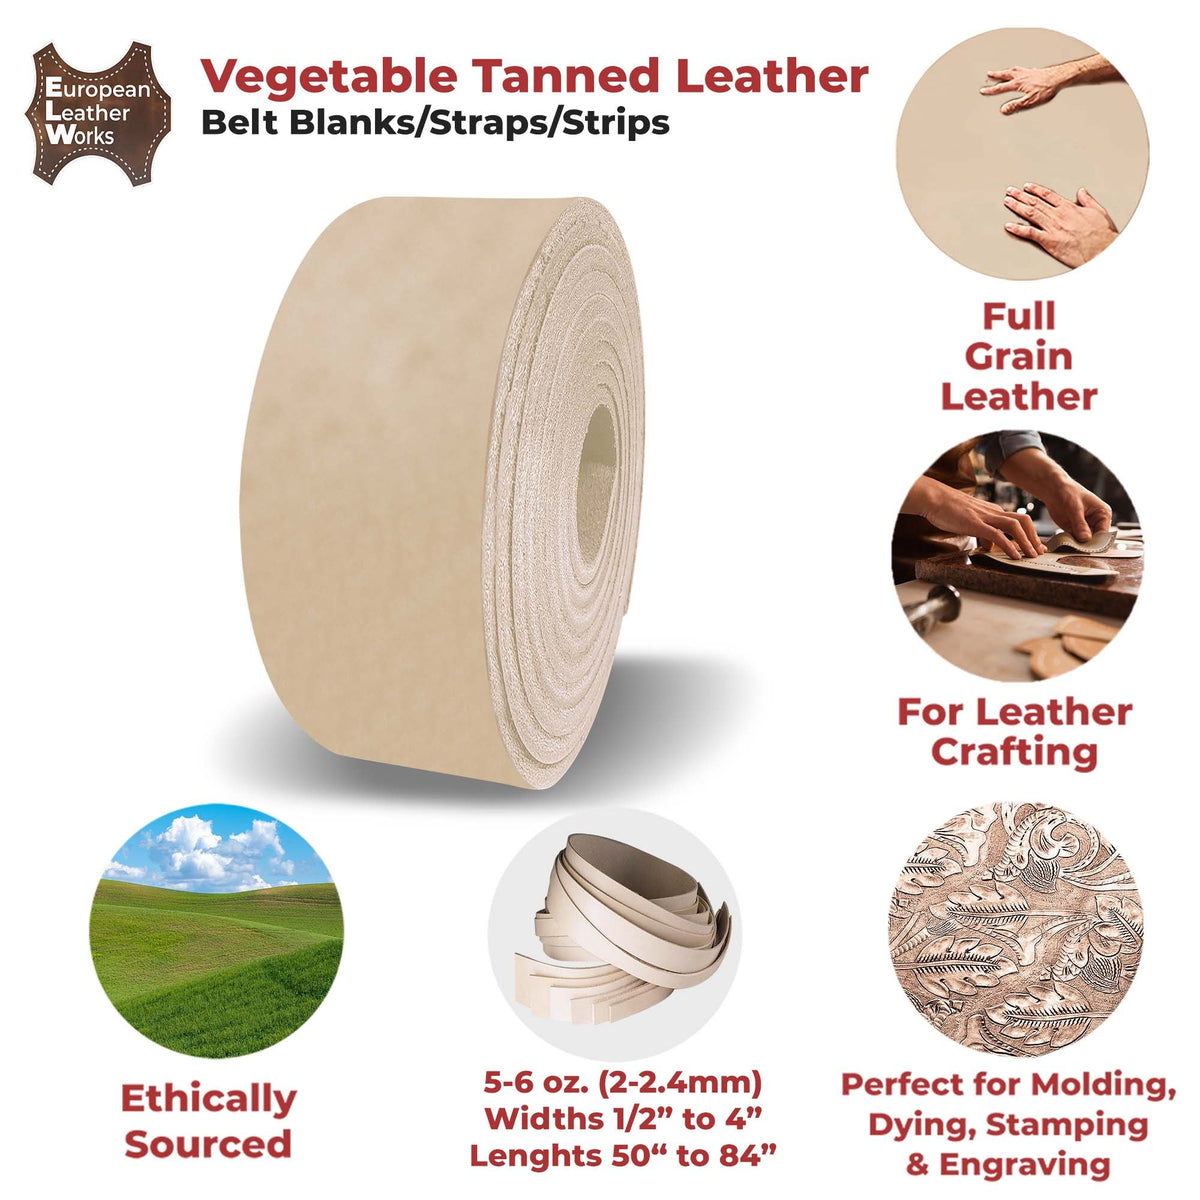 ELW Vegetable Tanned Leather ScrapsMixed Earth Tone 6-10 oz 2.4